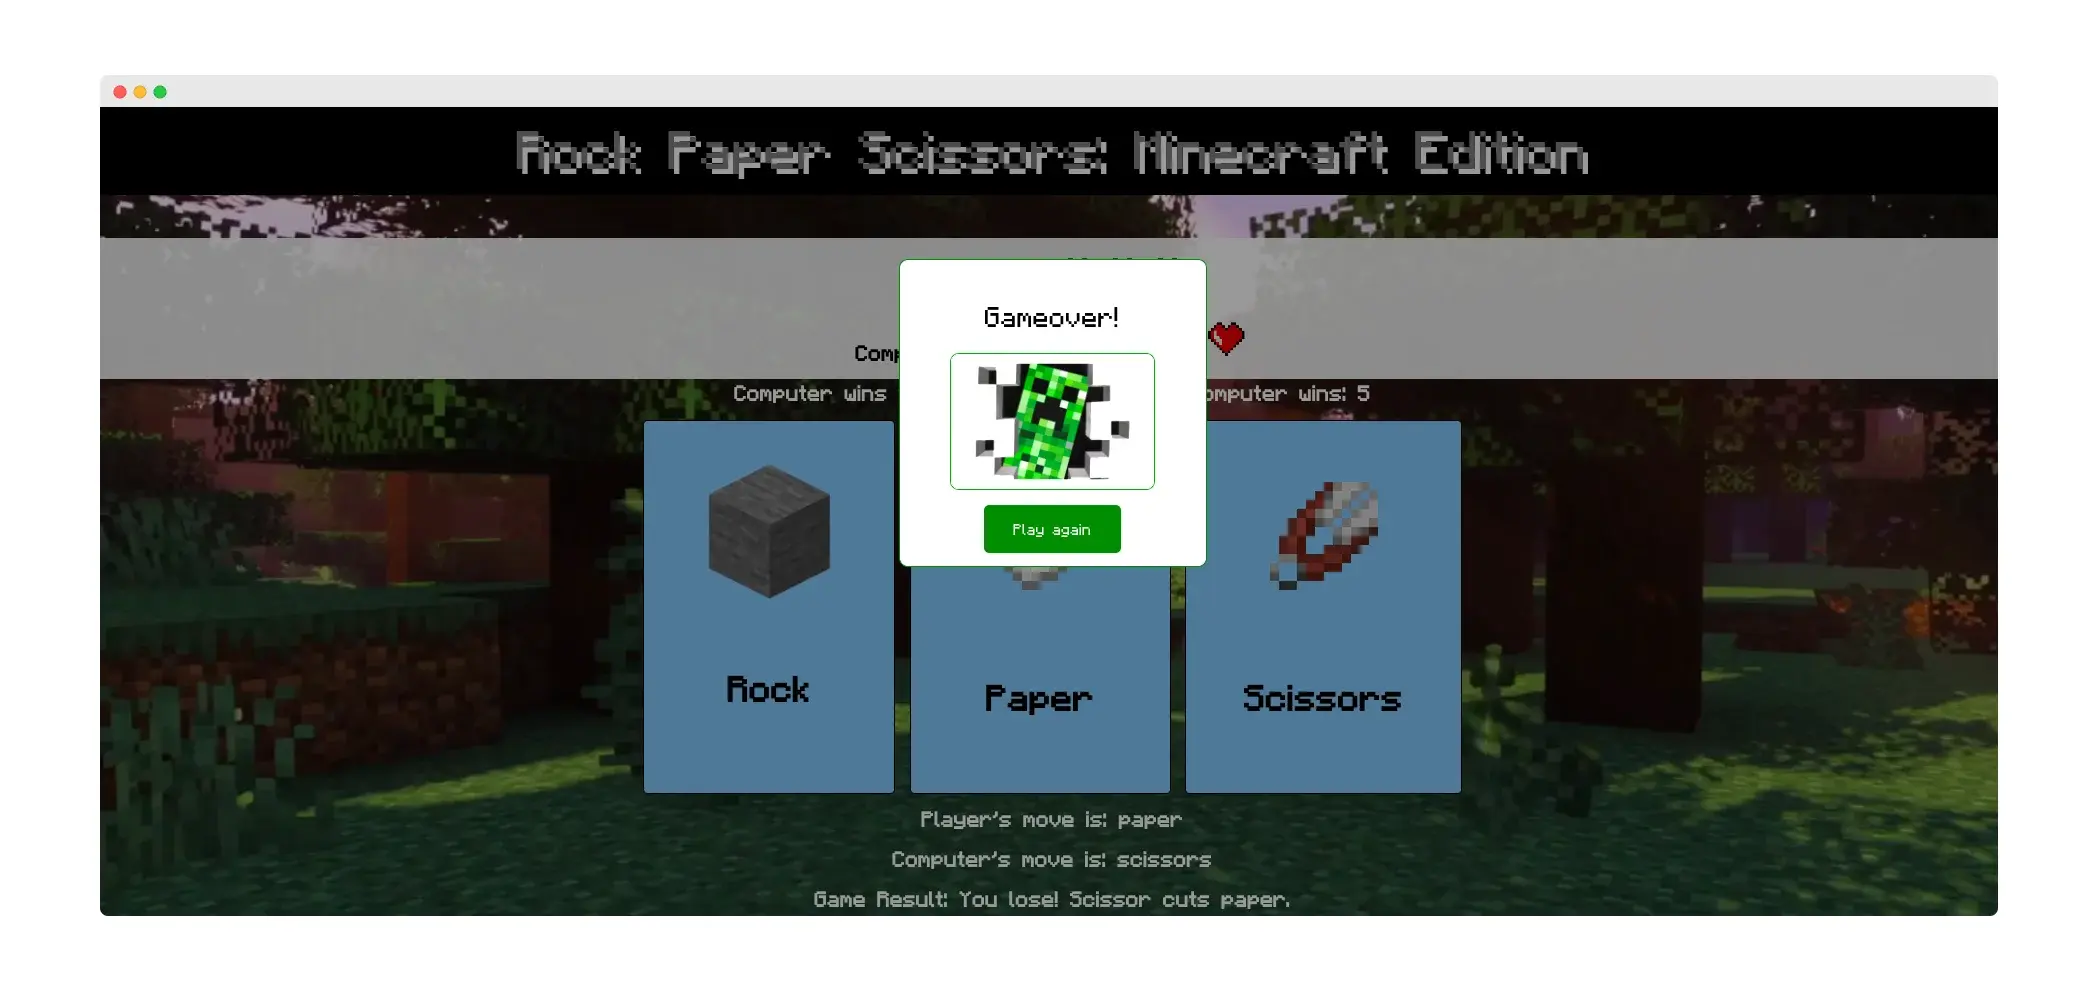 A screenshot of a game titled 'Rock Paper Scissors: Minecraft Edition'. The background features a Minecraft landscape with trees and grass.